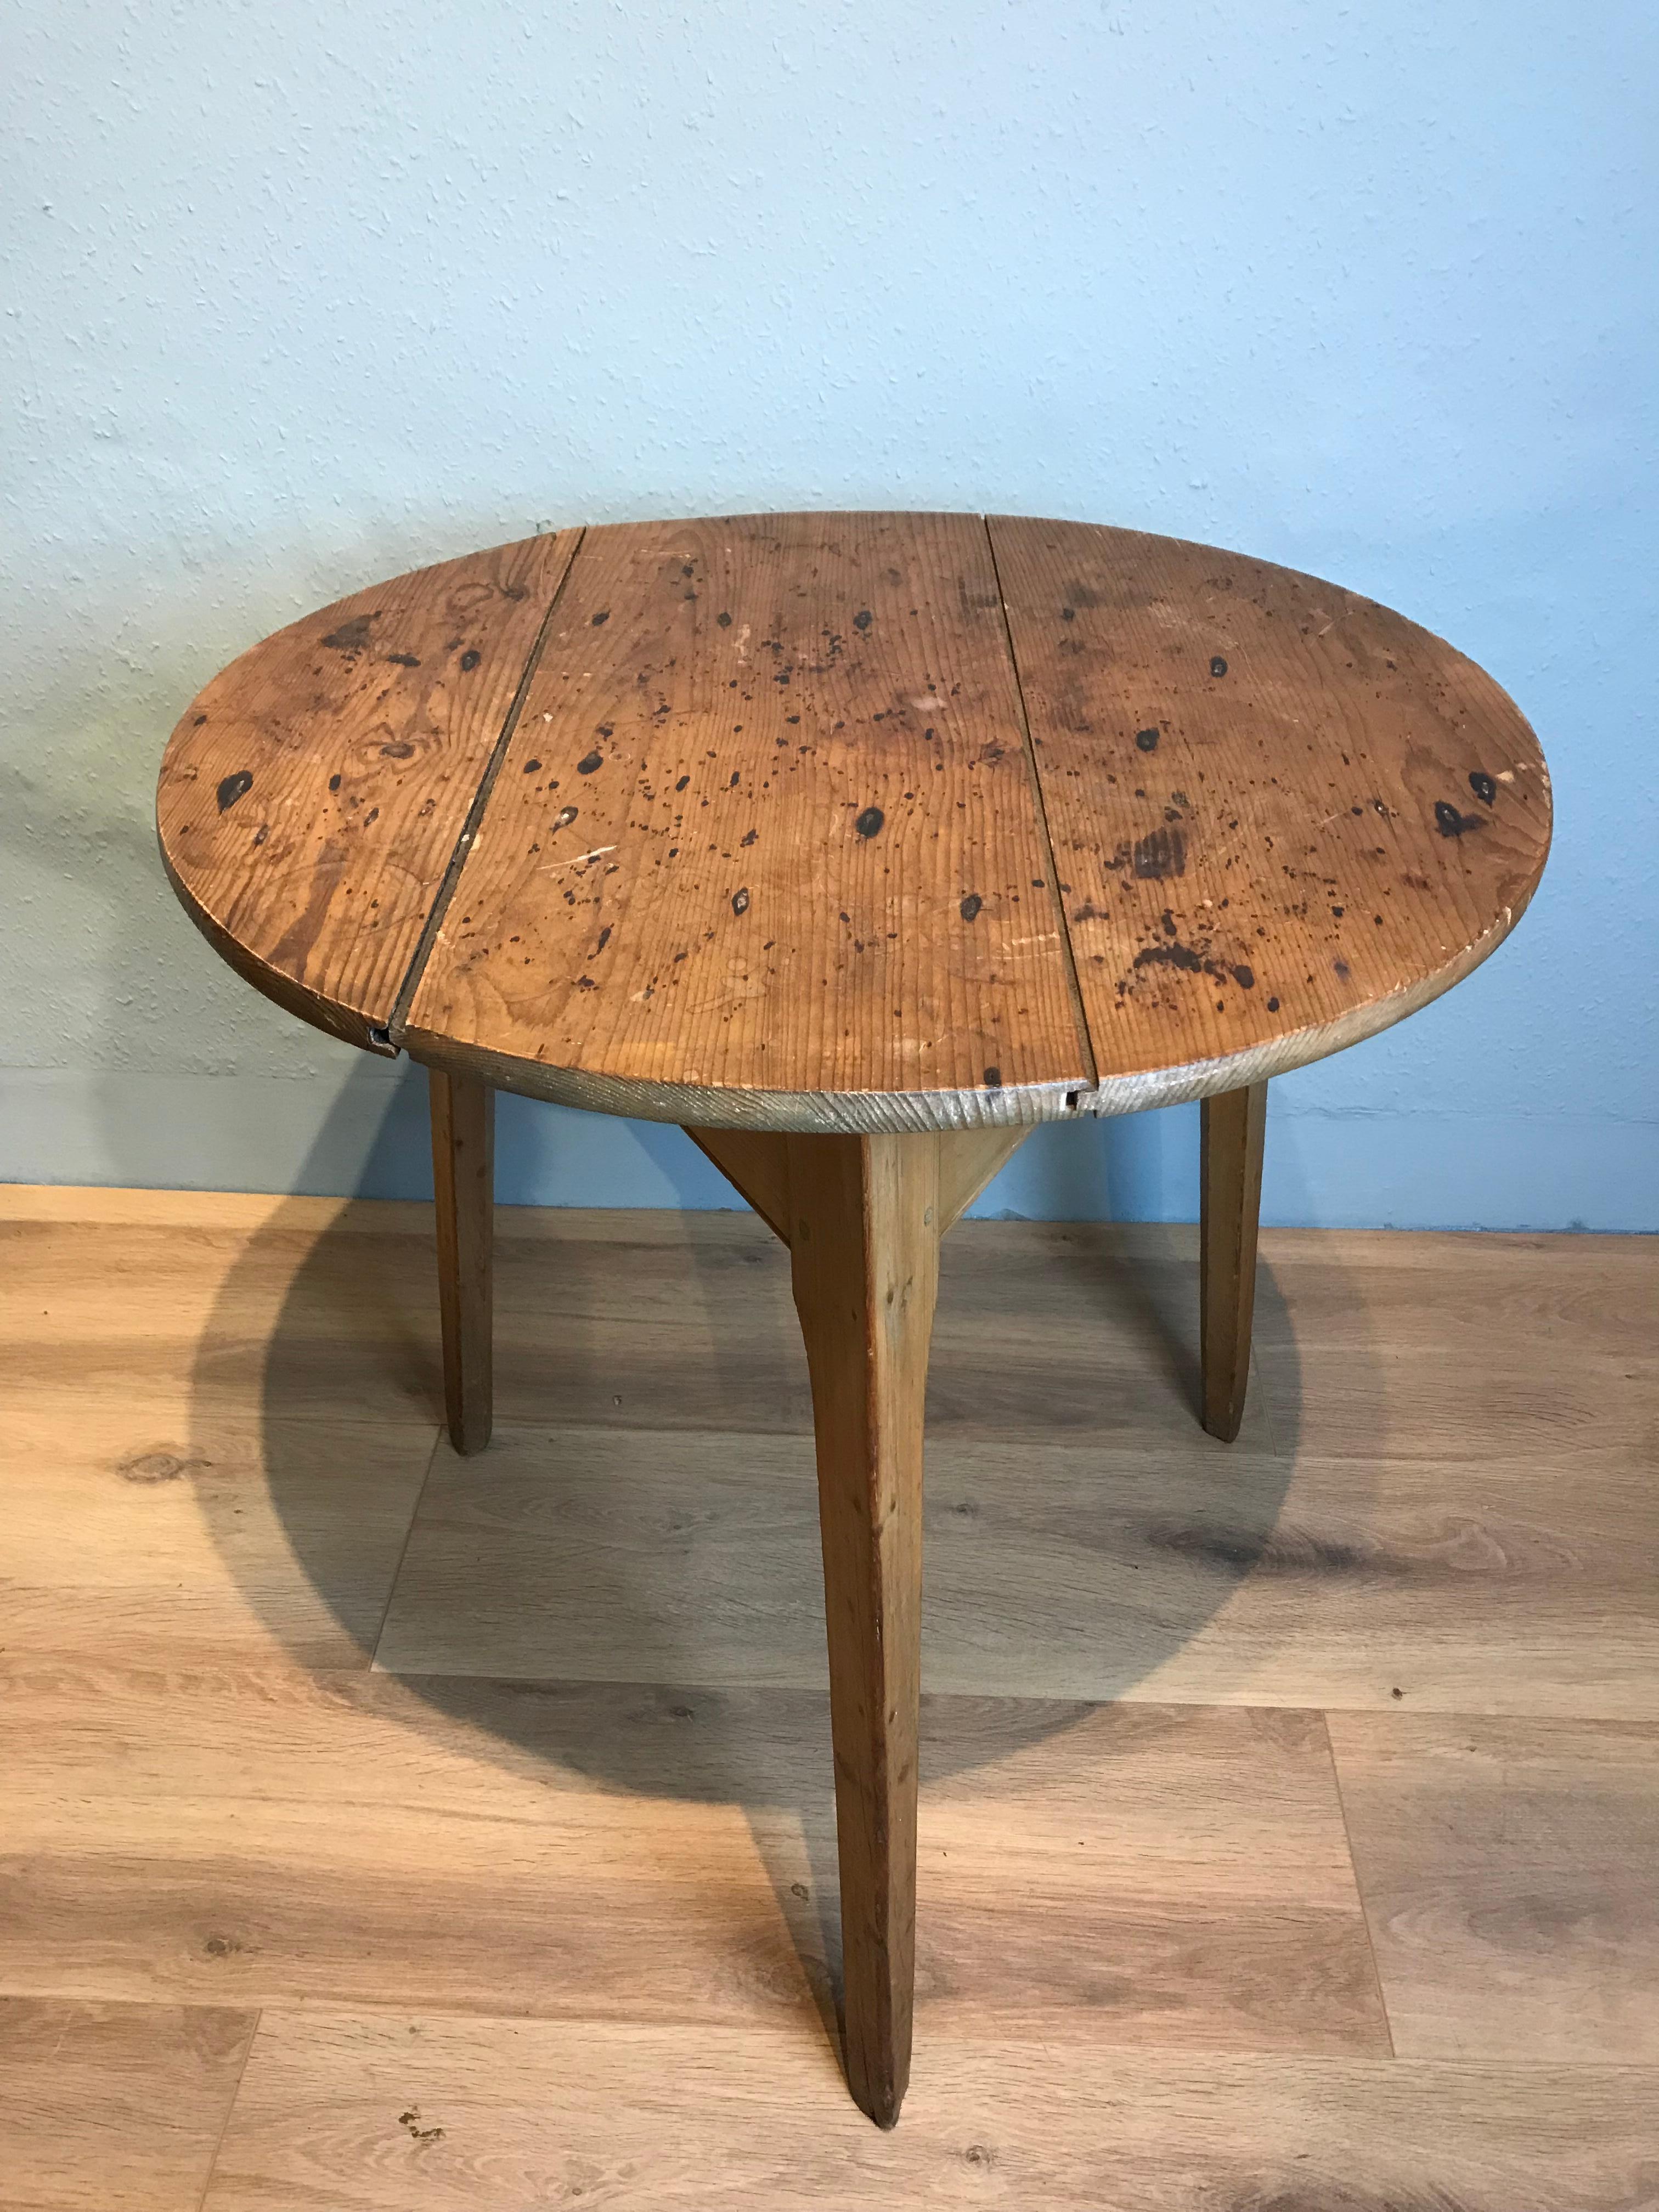 19th century Classic pine cricket table in wonderful original untouched condition. The top has never been removed with its original iron nails surrounded by its natural tannins. The three plank top has naturally shrunk, the underside is just how you